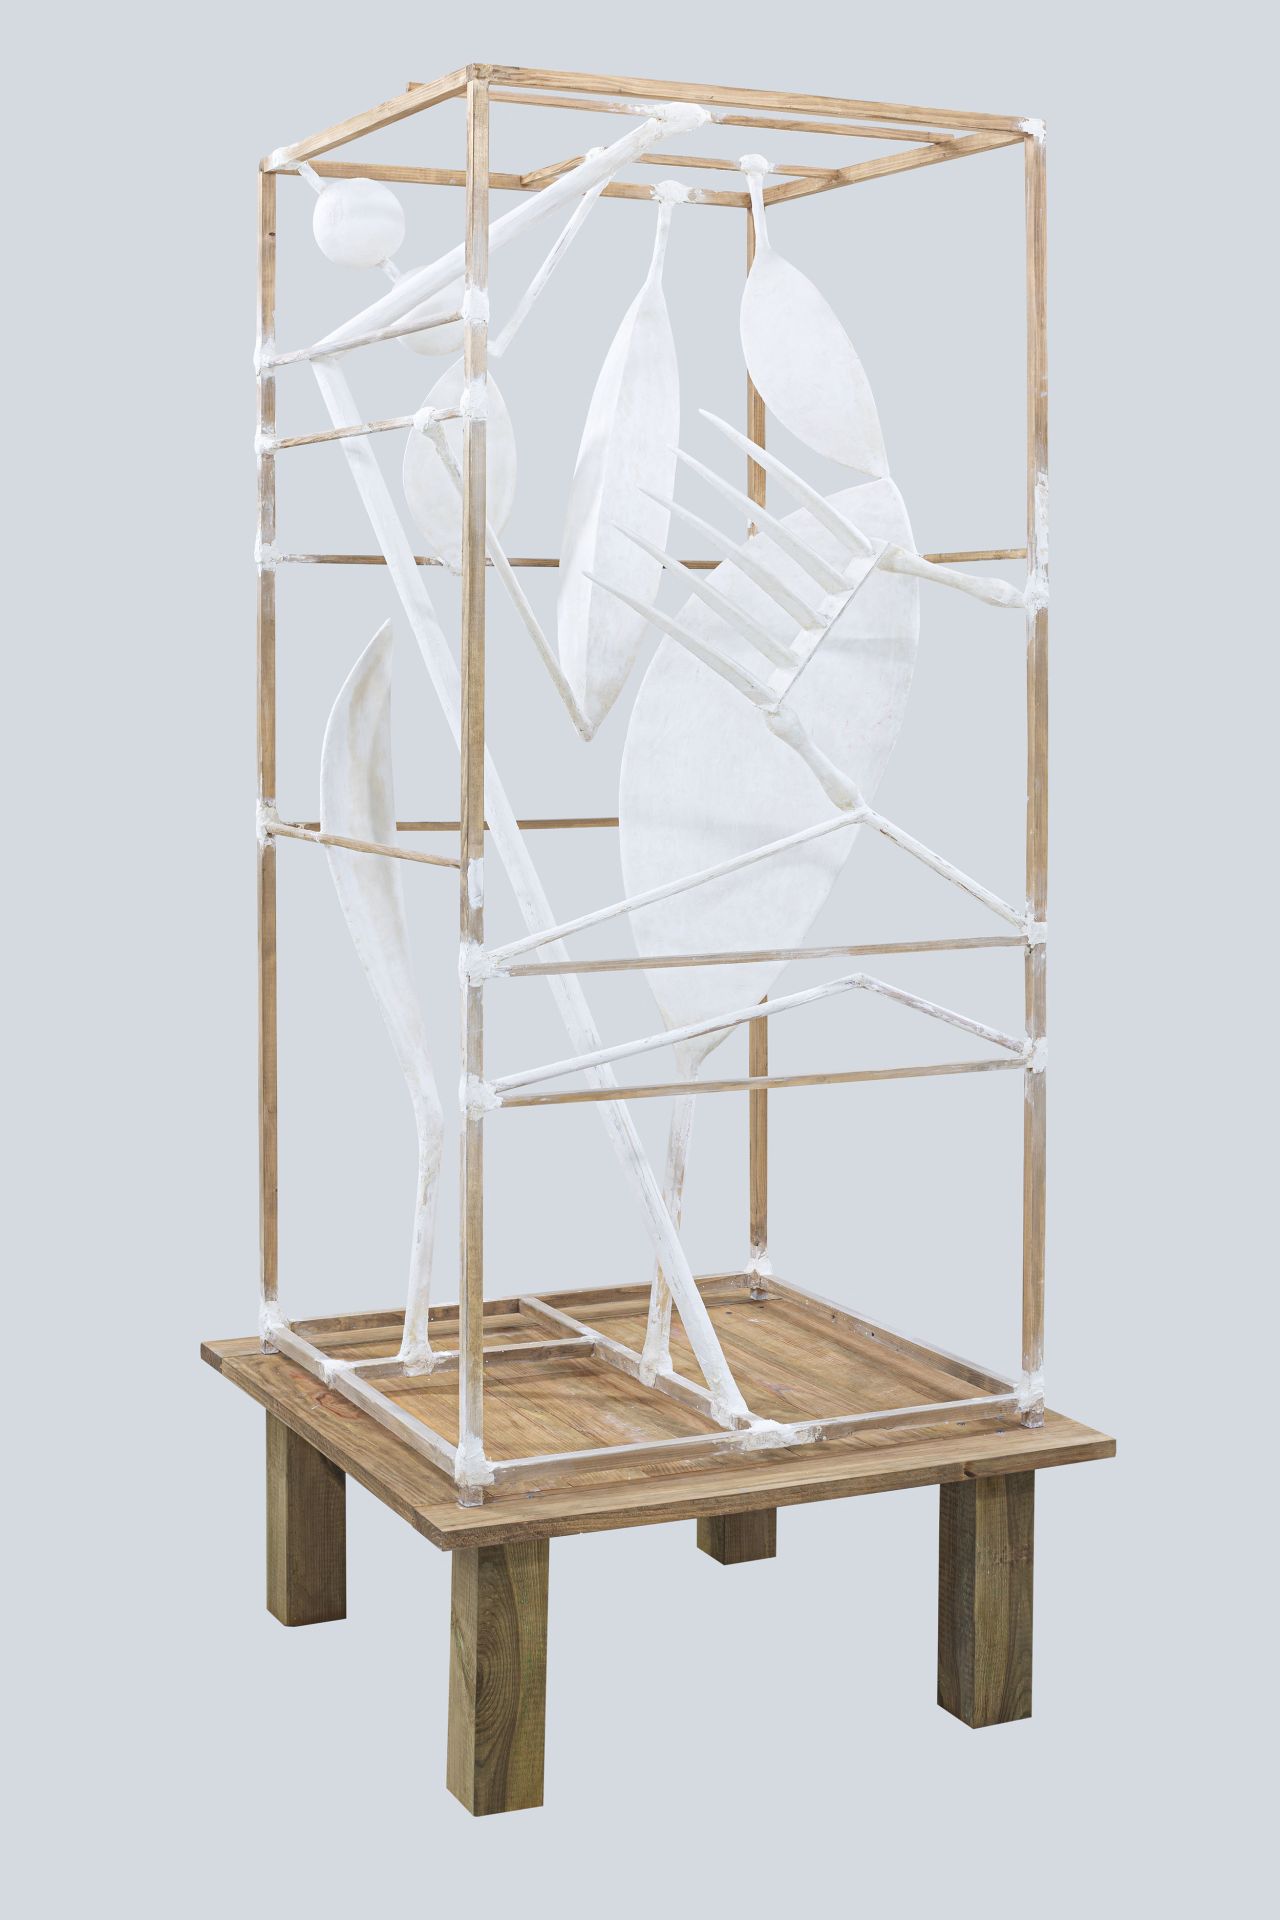 A reconstruction of "Silence Bird," which only exhibited once before it was accidentally destroyed in Max Ernst's studio.